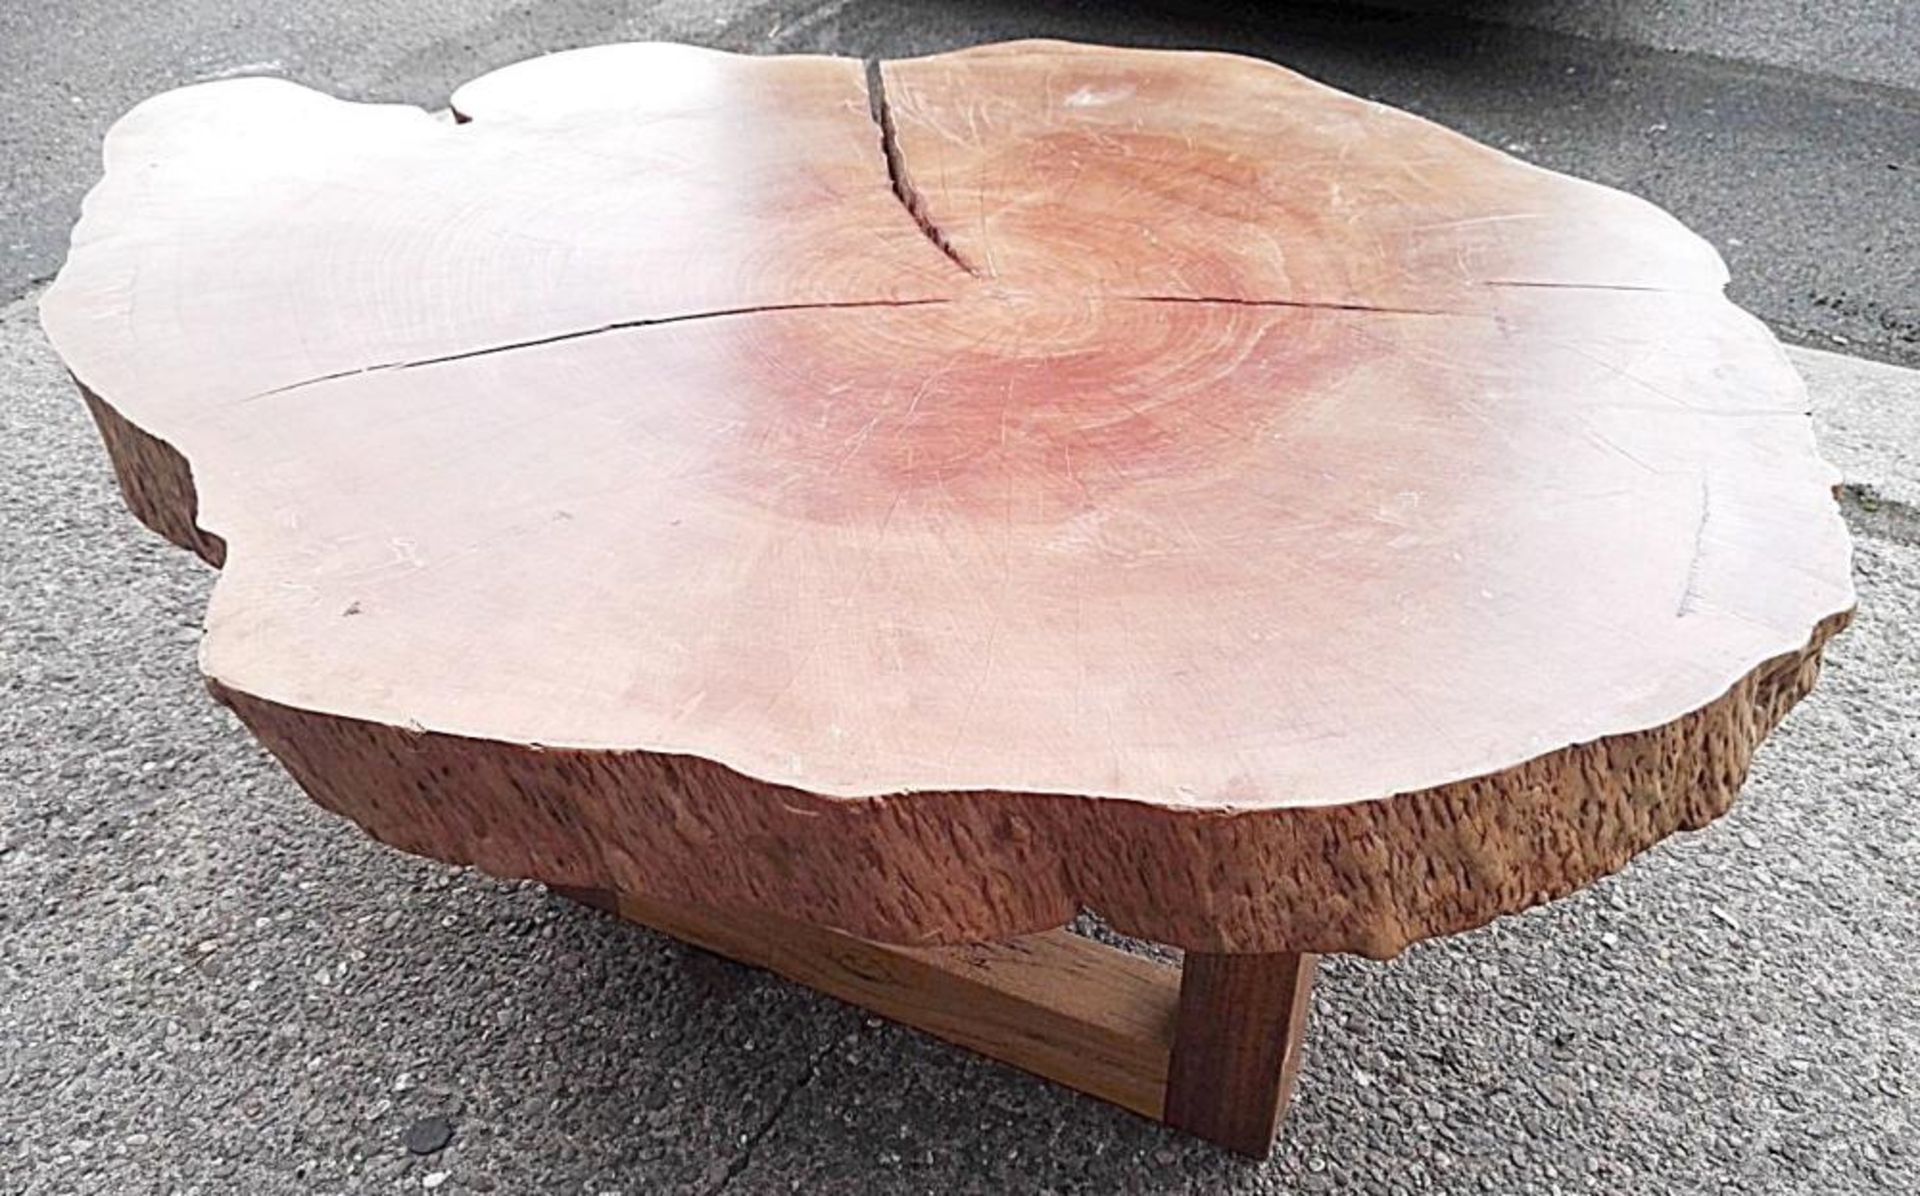 1 x Unique Reclaimed Solid Tree Trunk Coffee Table - Dimensions (approx): W152 x D129 x H63.3cm - Re - Image 4 of 7